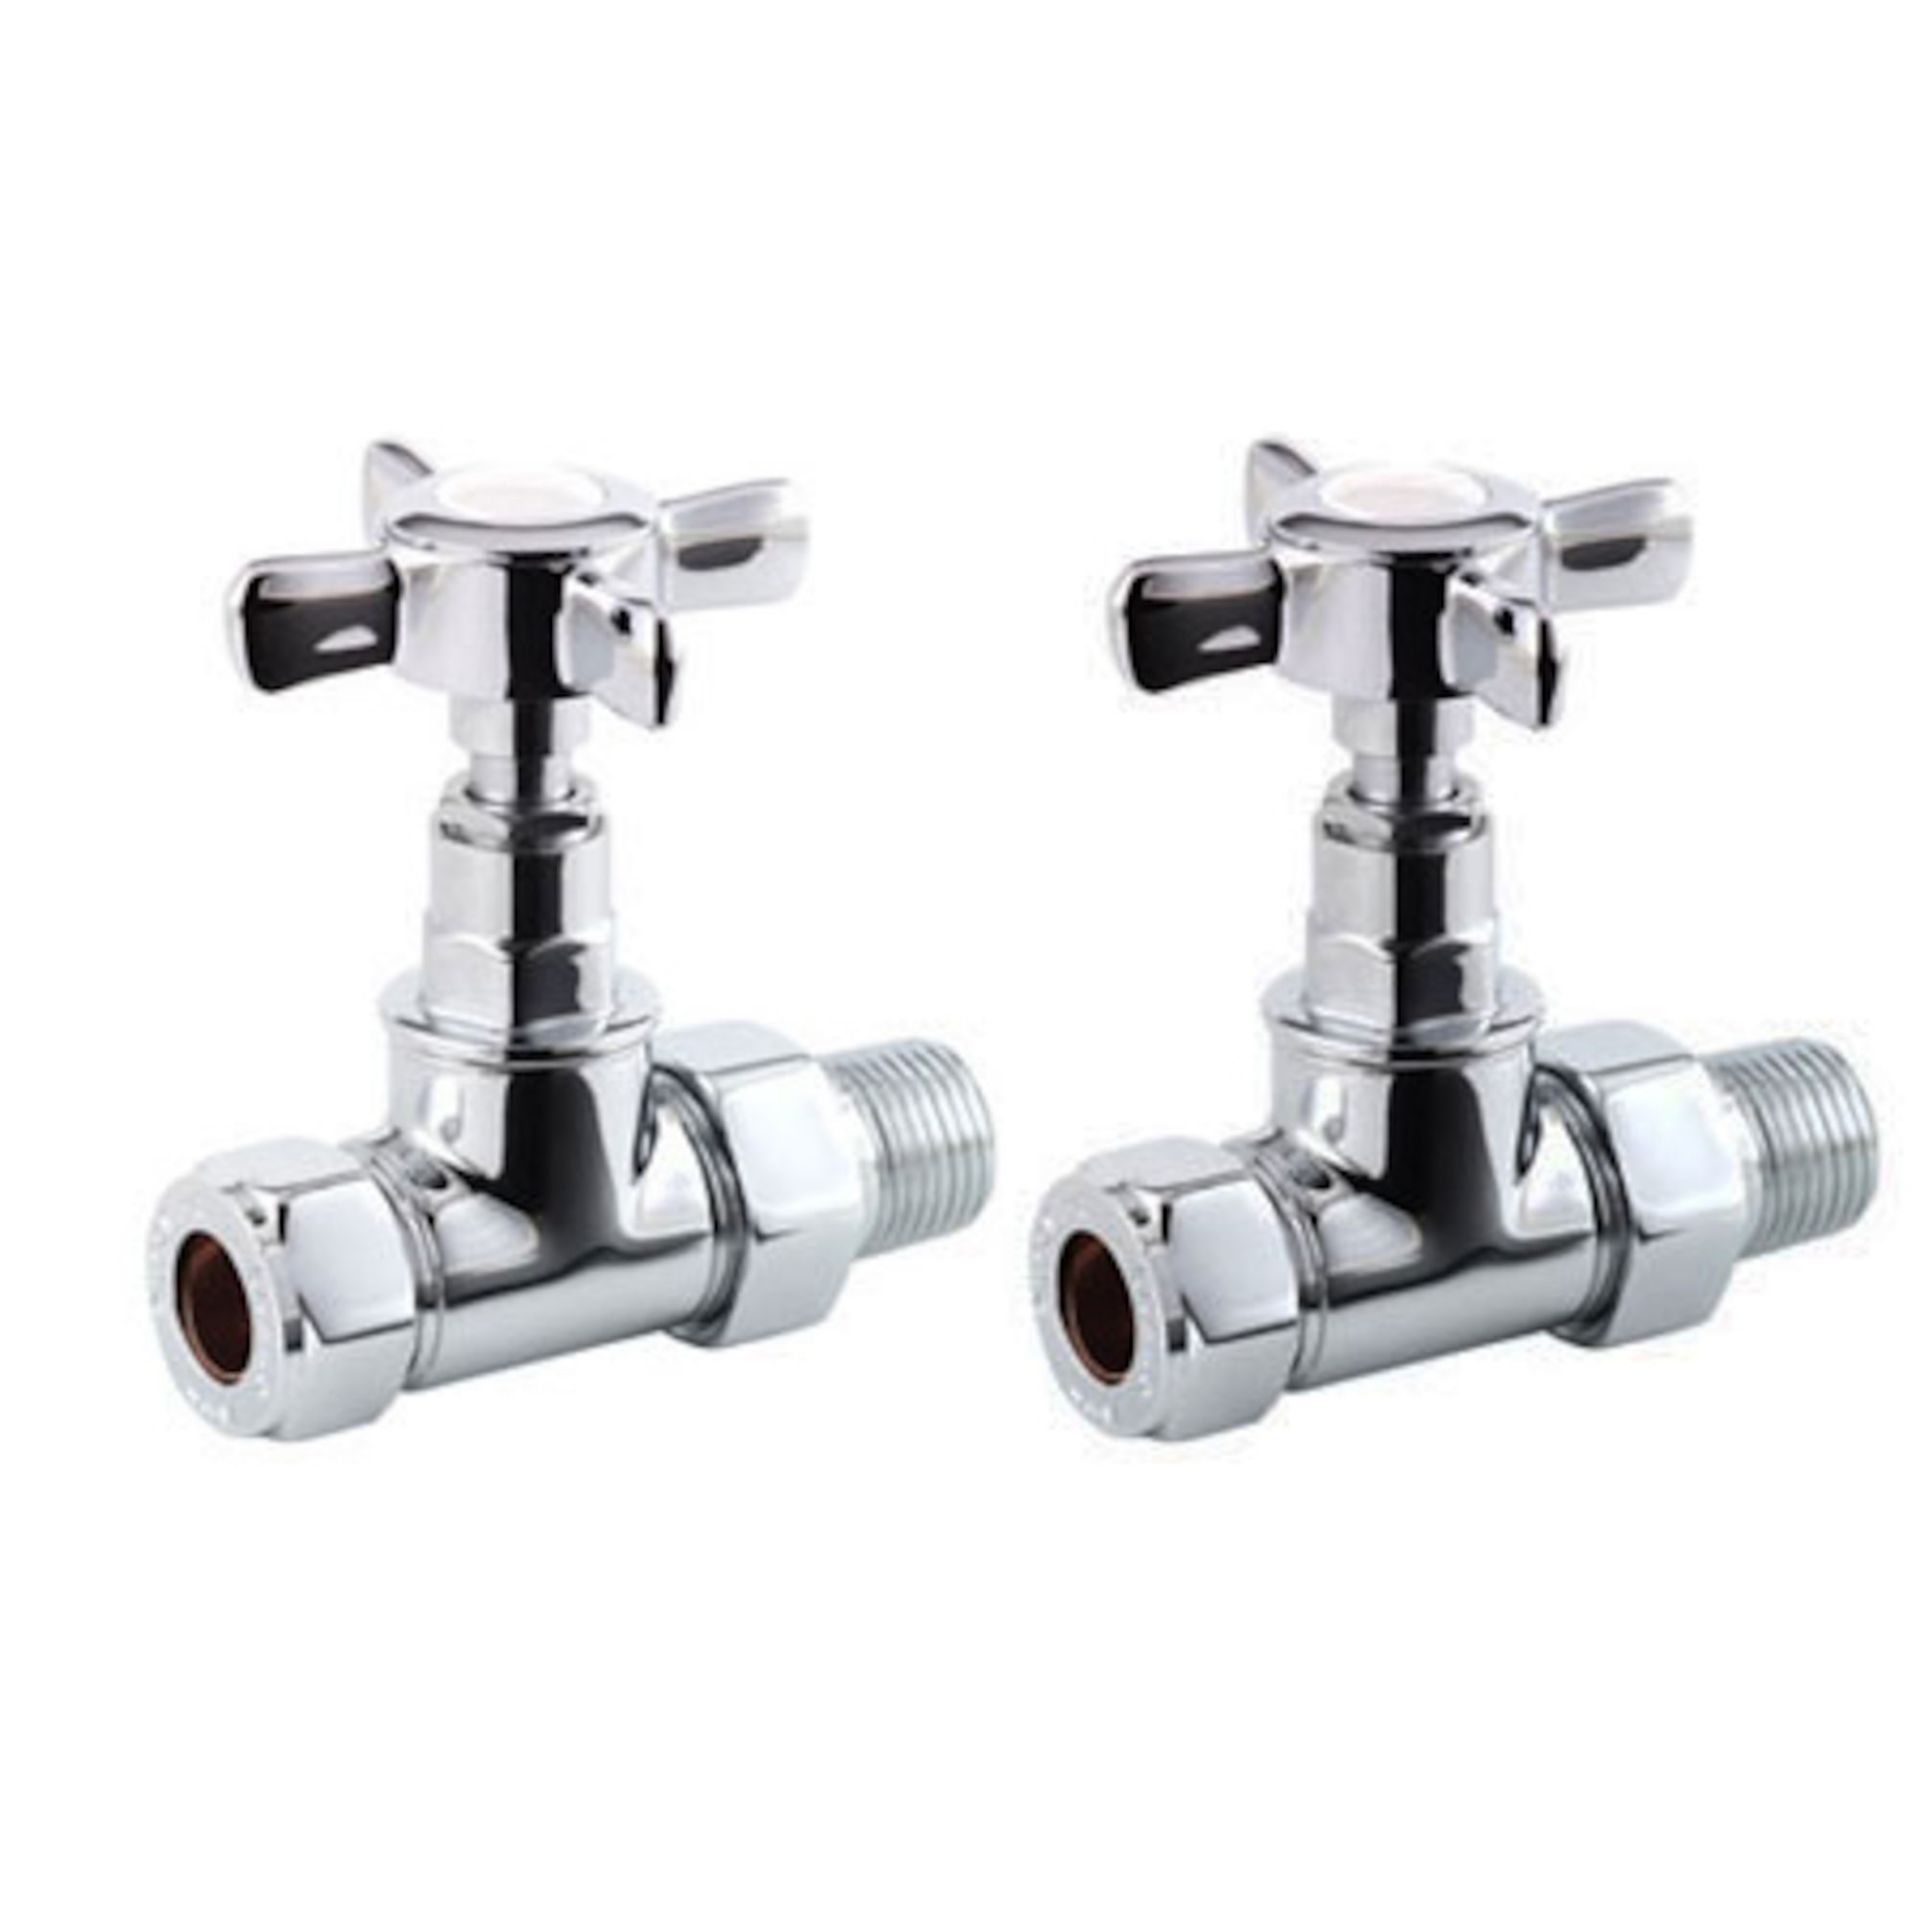 (PT164) 15mm Standard Connection Straight Polished Chrome Radiator Valves Chrome Plated Solid